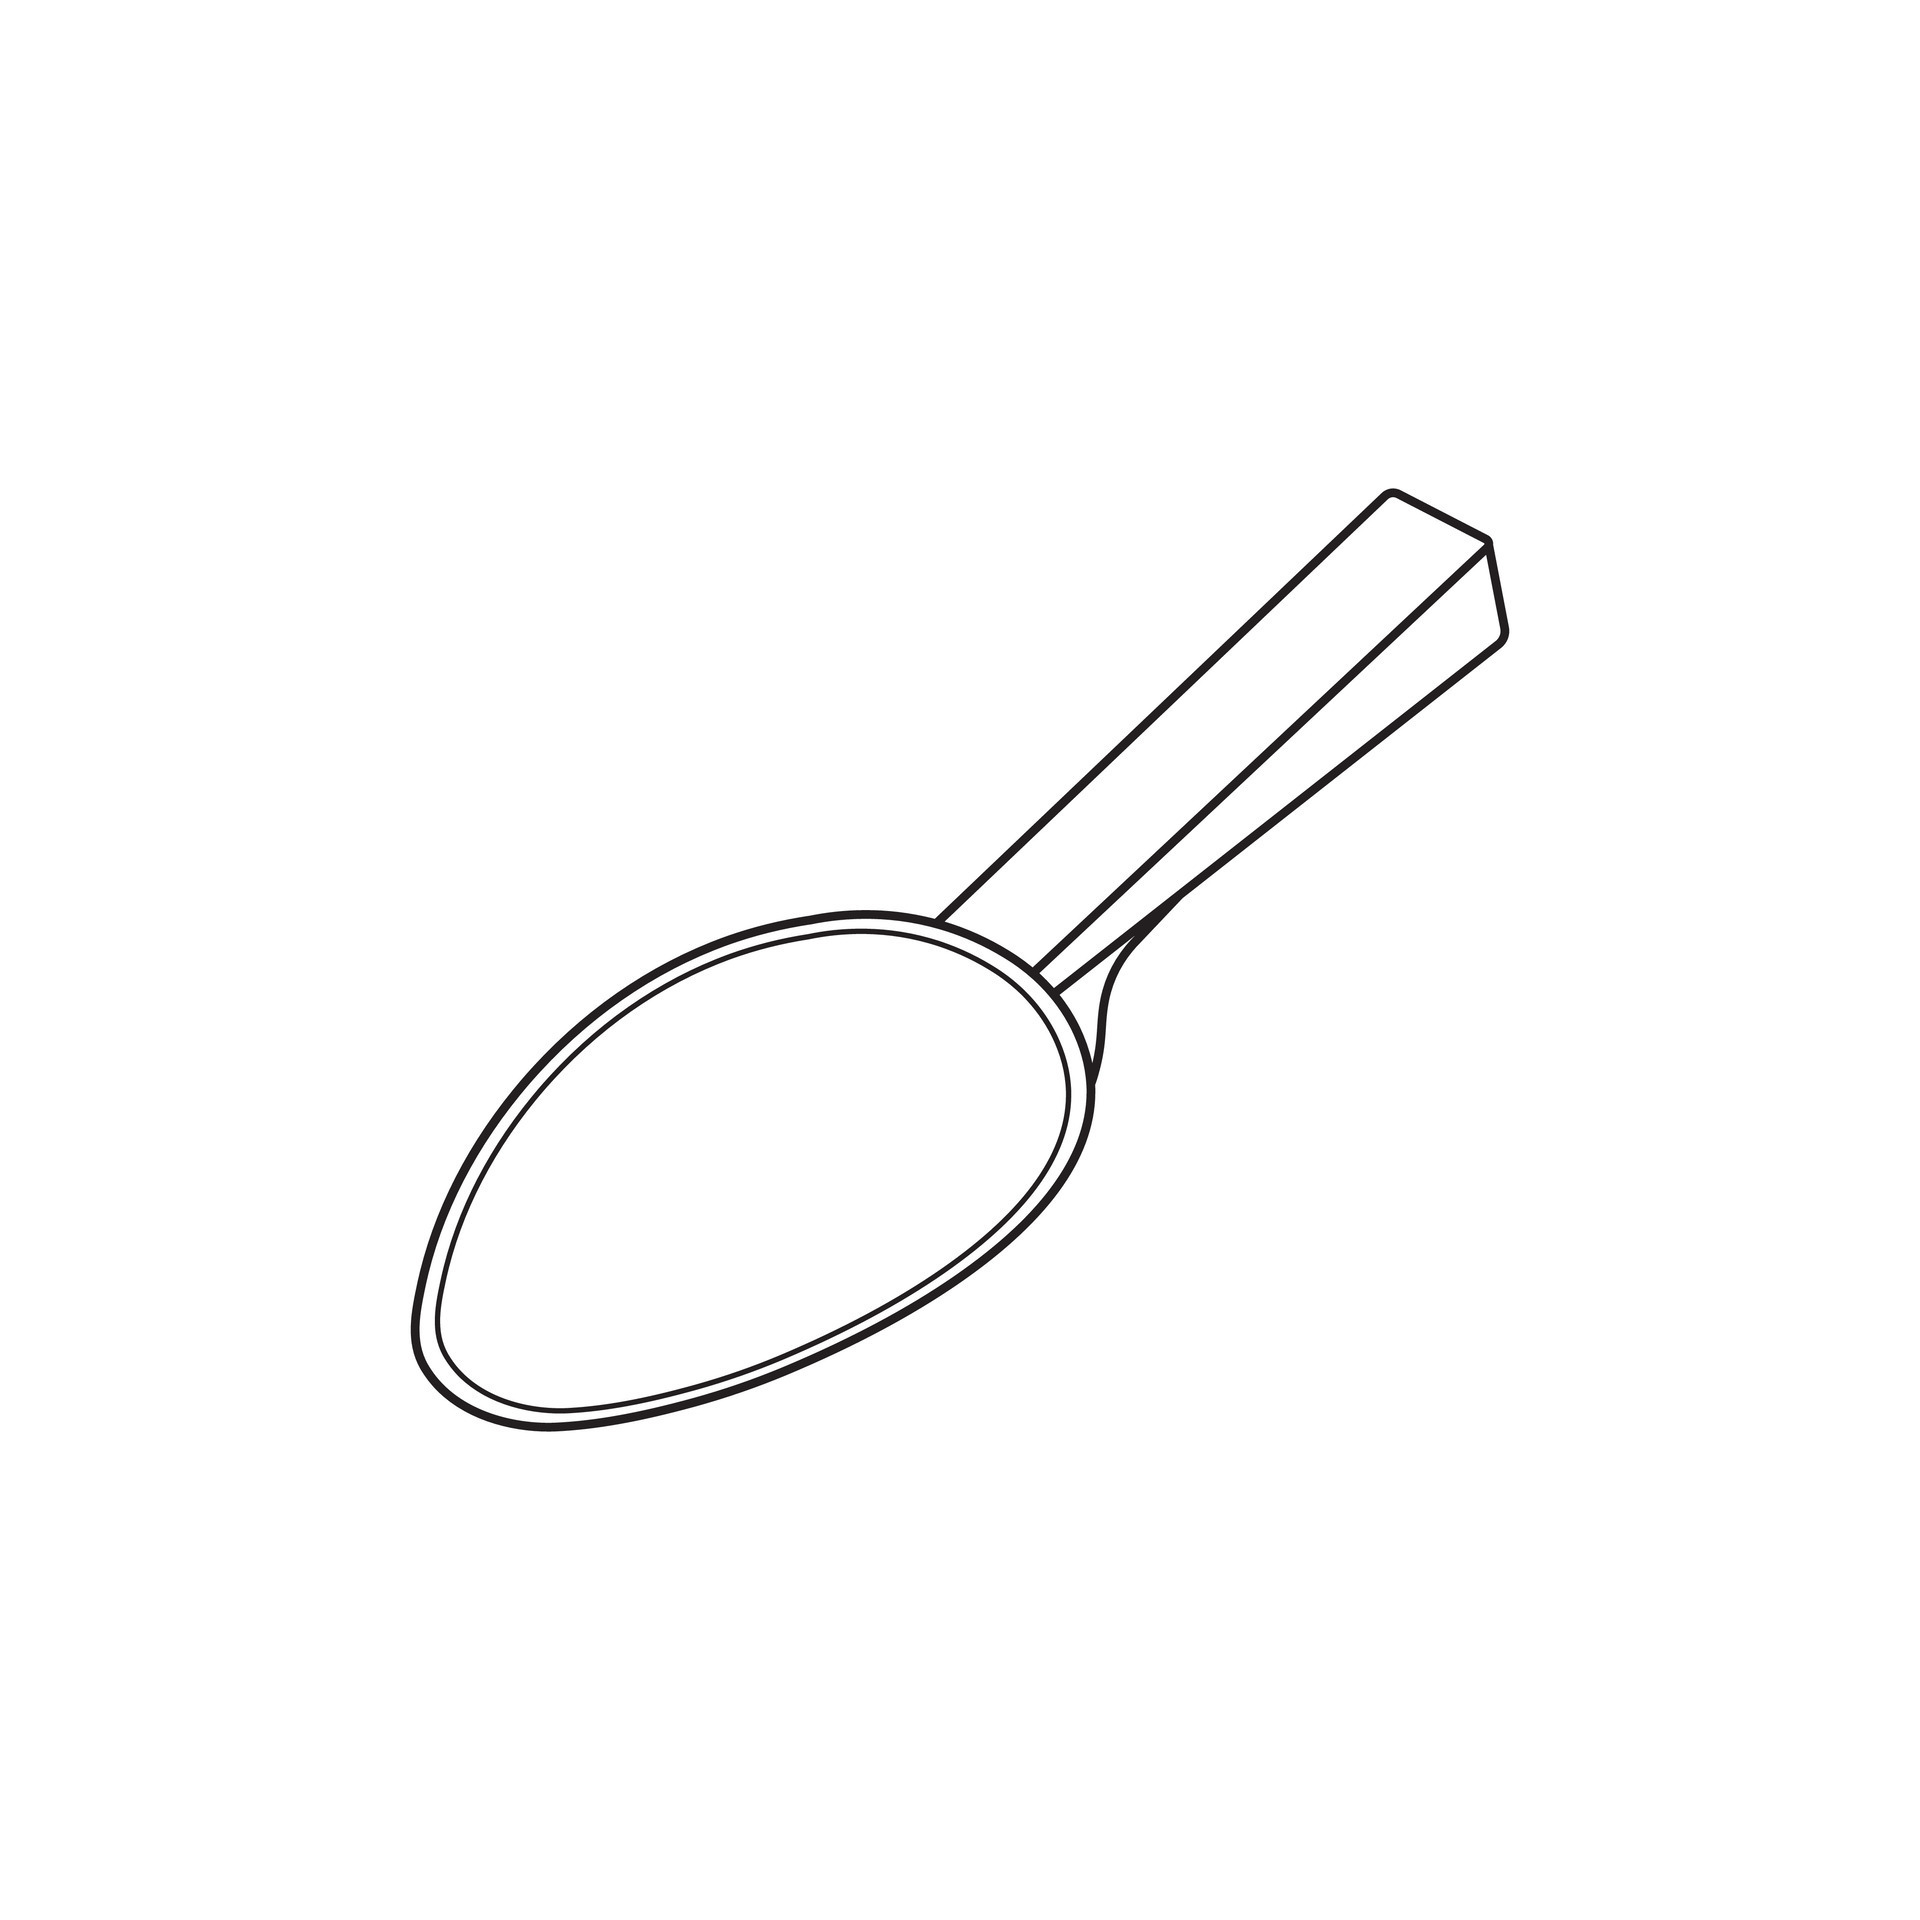 https://static.vecteezy.com/system/resources/previews/033/484/732/original/hand-drawn-kids-drawing-cartoon-illustration-medicine-measuring-spoon-isolated-in-doodle-style-vector.jpg